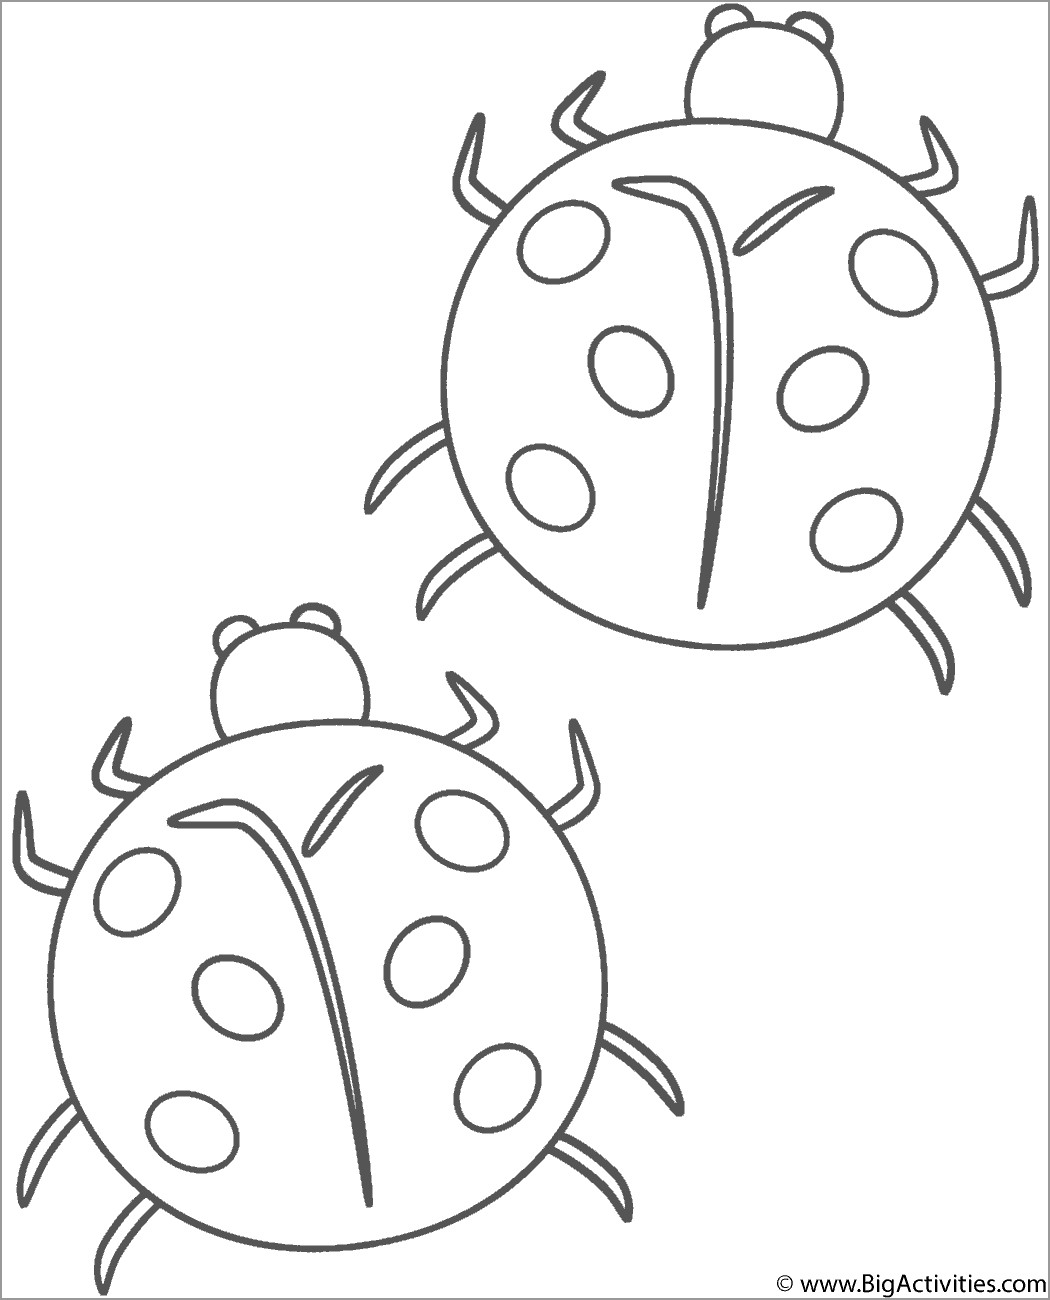 Two Ladybugs Coloring Page